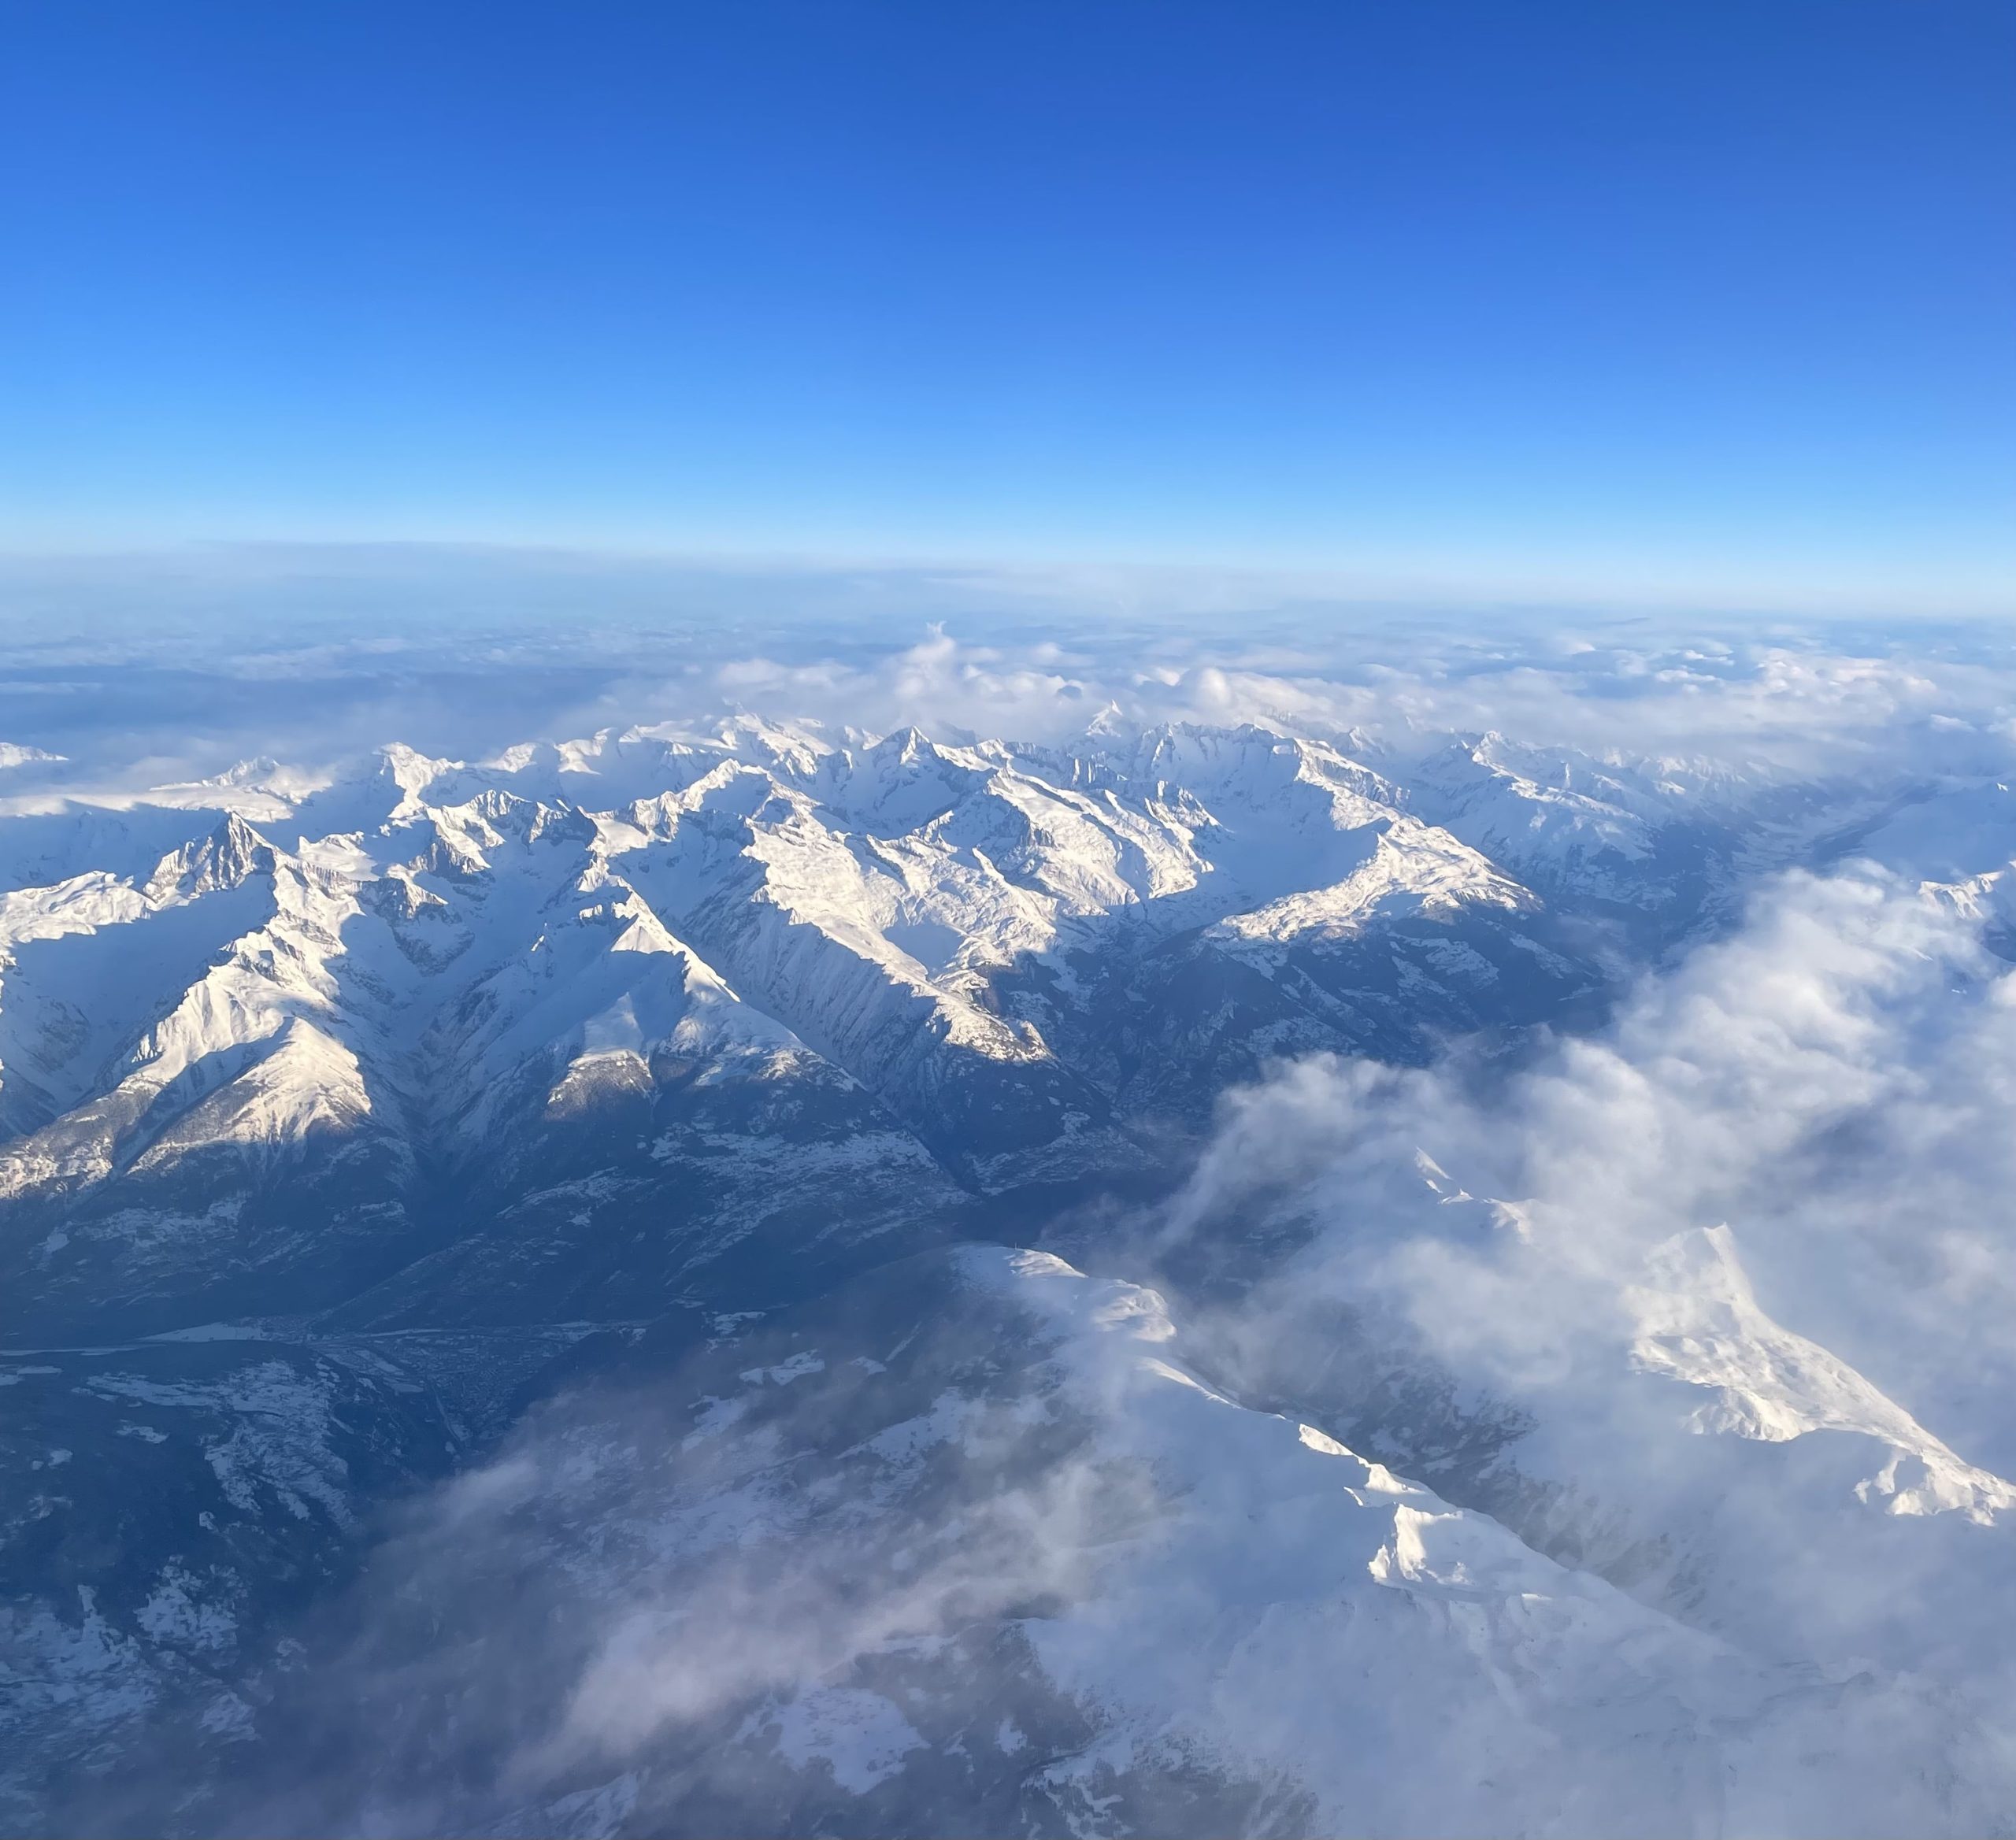 Alps seen from plane